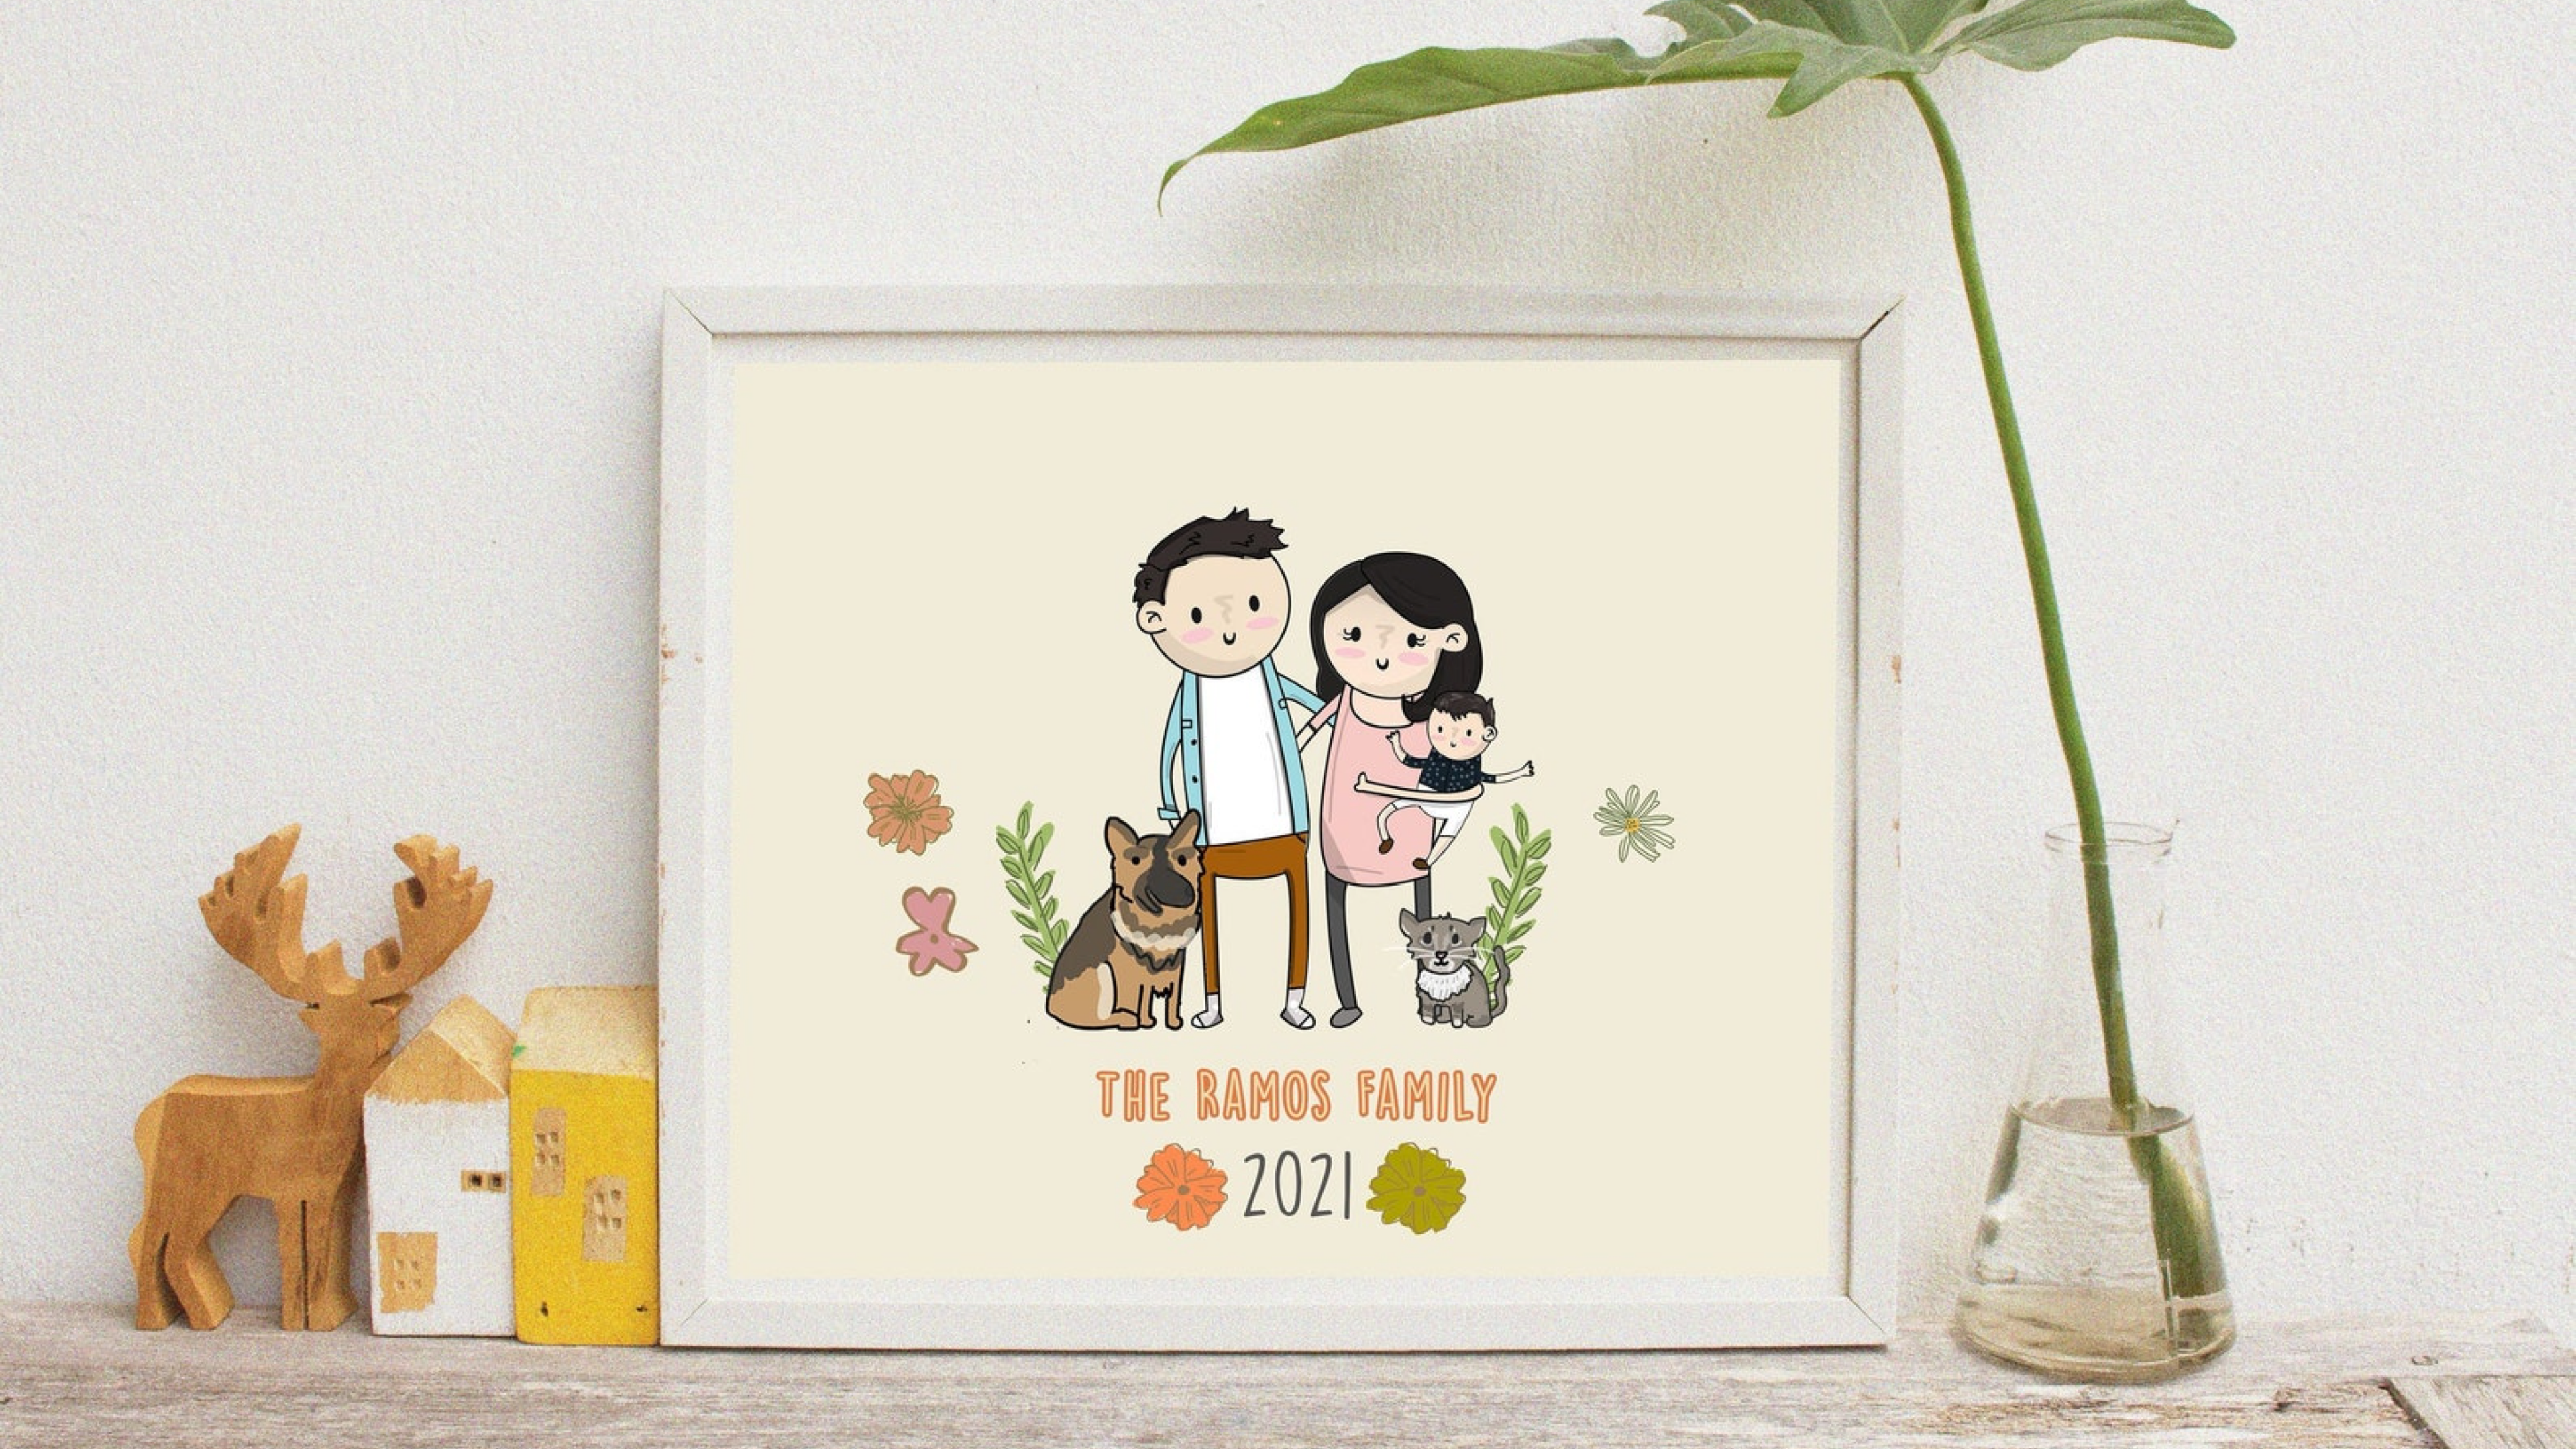 An adorable personalized family portrait